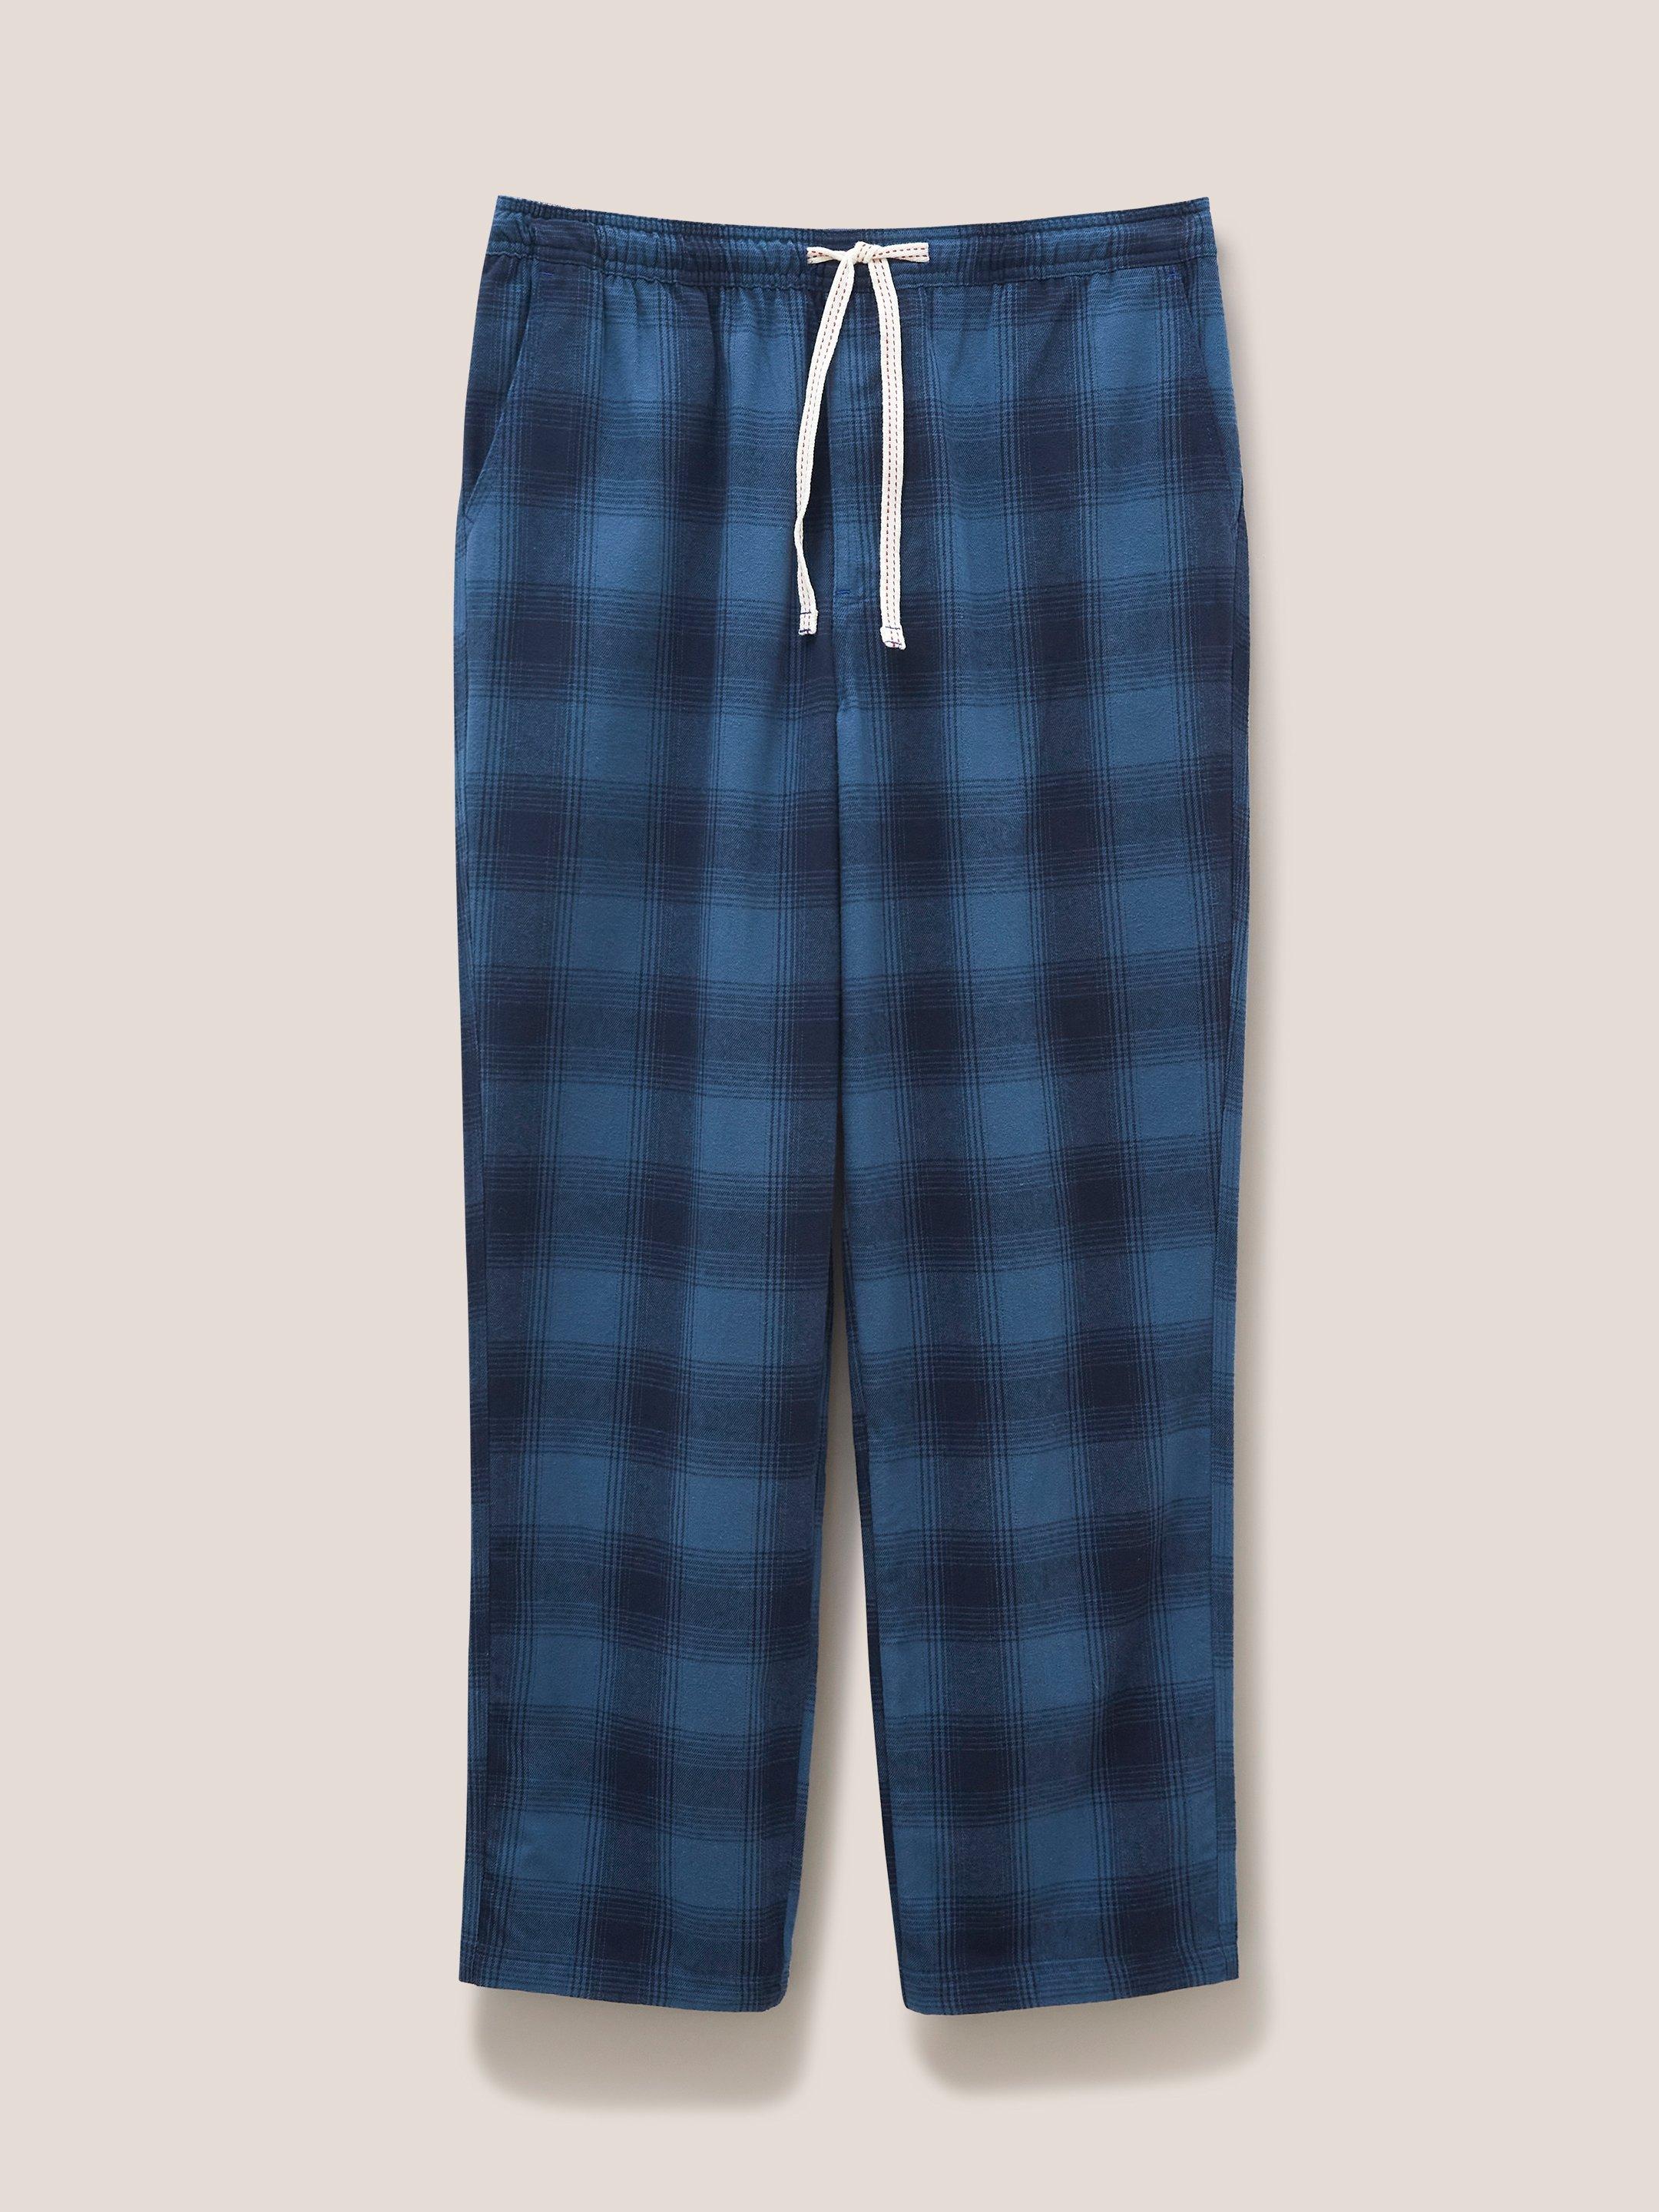 Leyland PJ Trouser in MID TEAL - FLAT FRONT